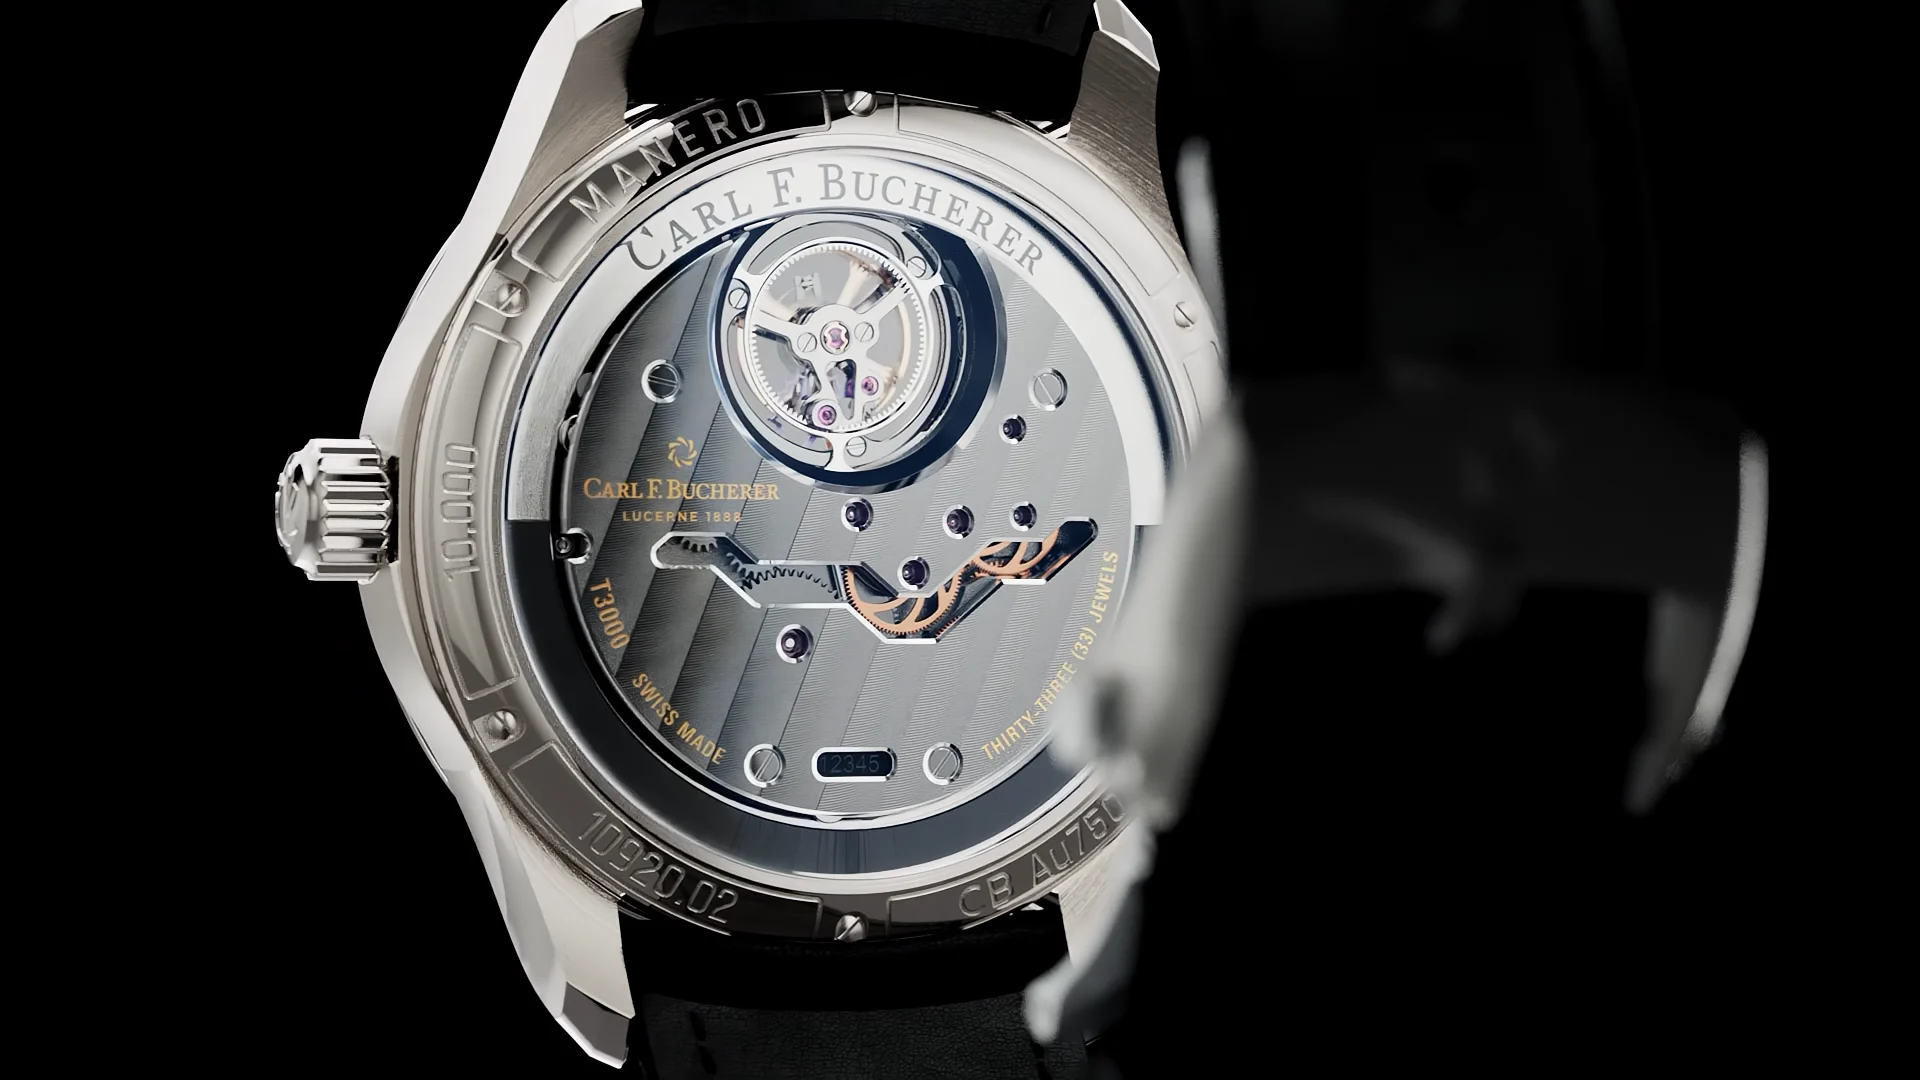 we see the back of a Carl F Bucherer watch where we have a look inside the watch including turbillon